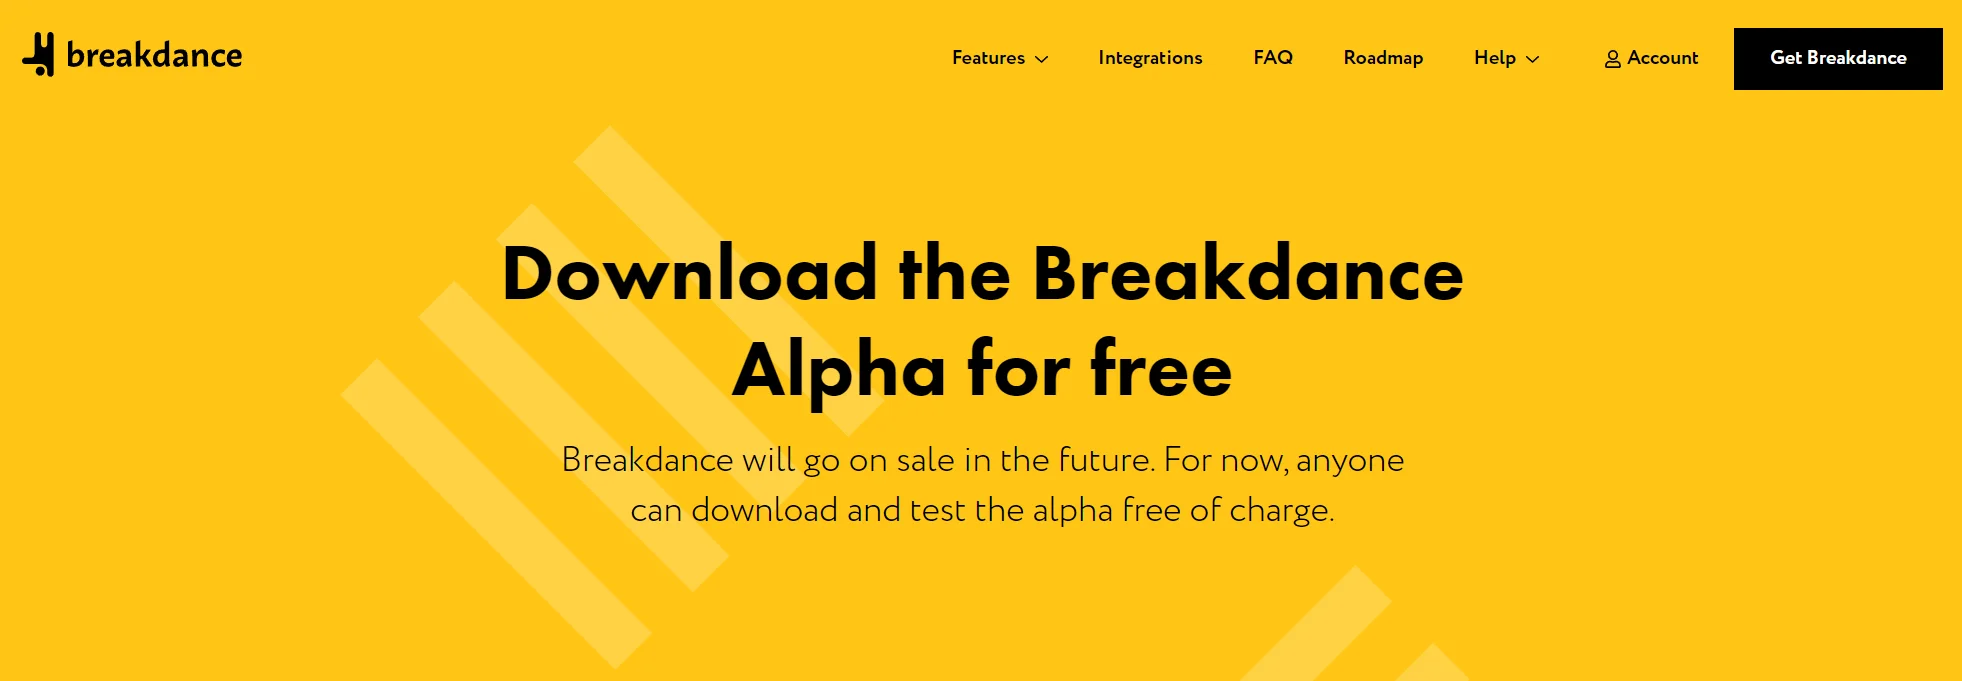 breakdance-pricing